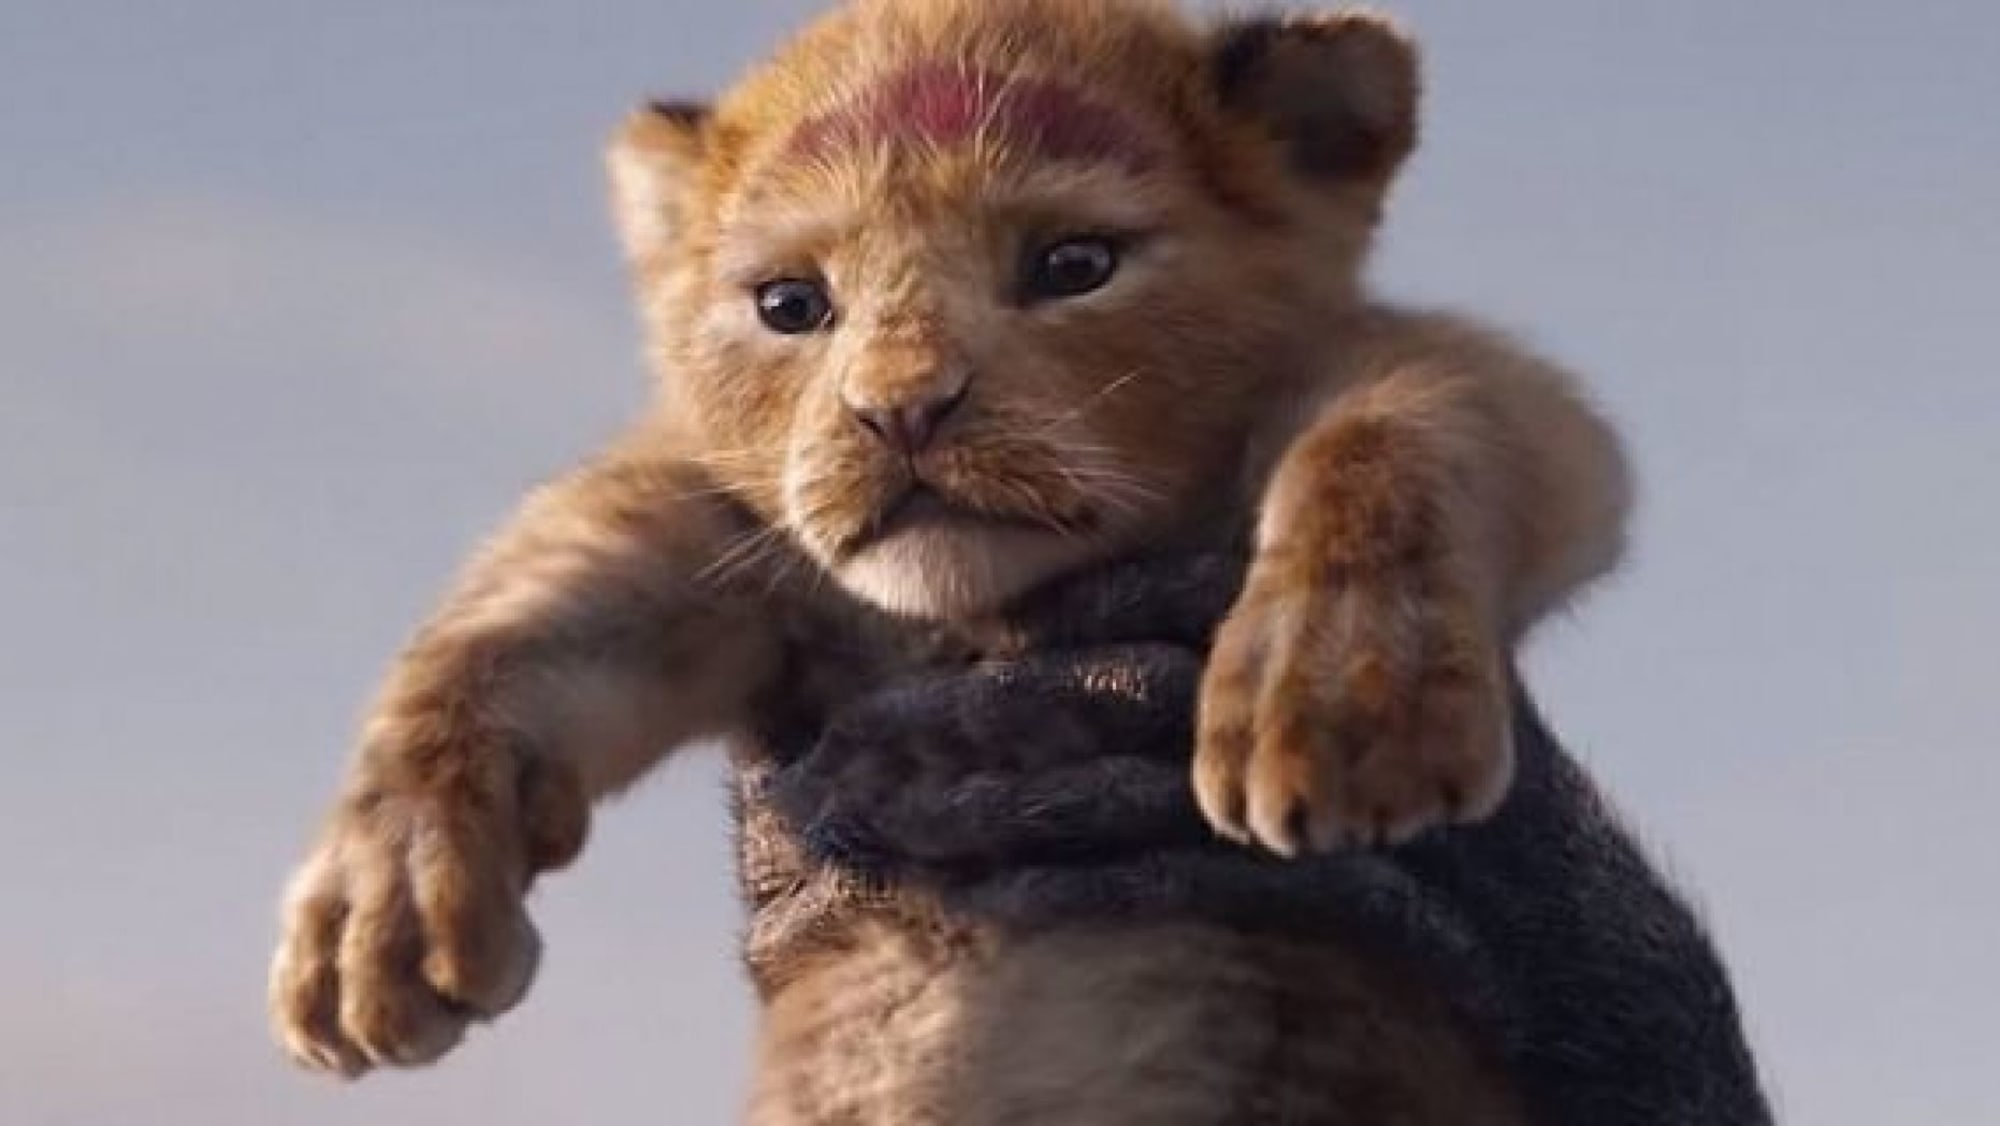 Disney Releases New Trailer Poster For Live Action Lion King Movie